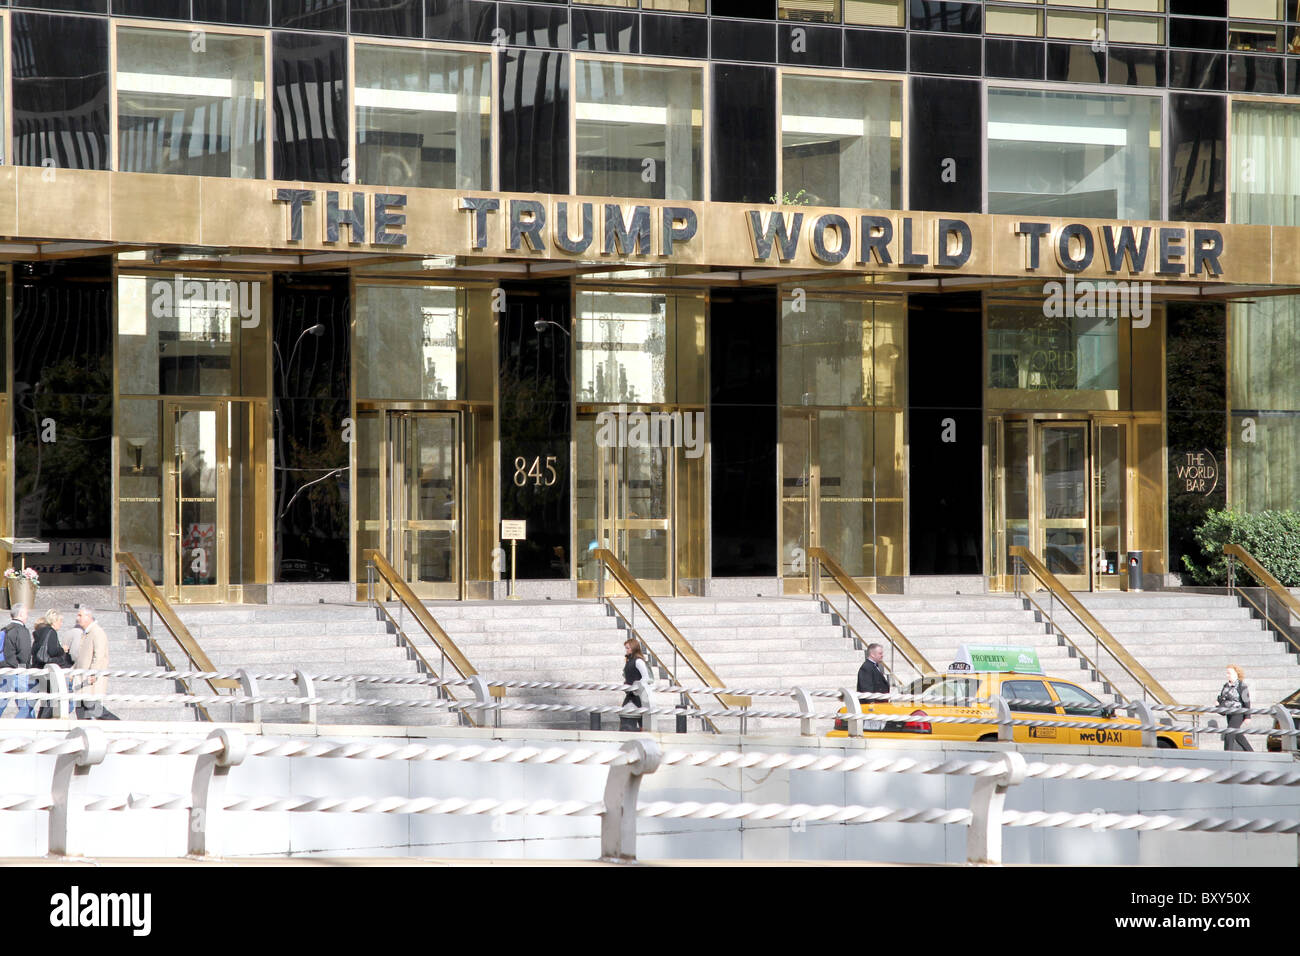 The Trump World Tower on 1st Avenue in New York, America Stock Photo